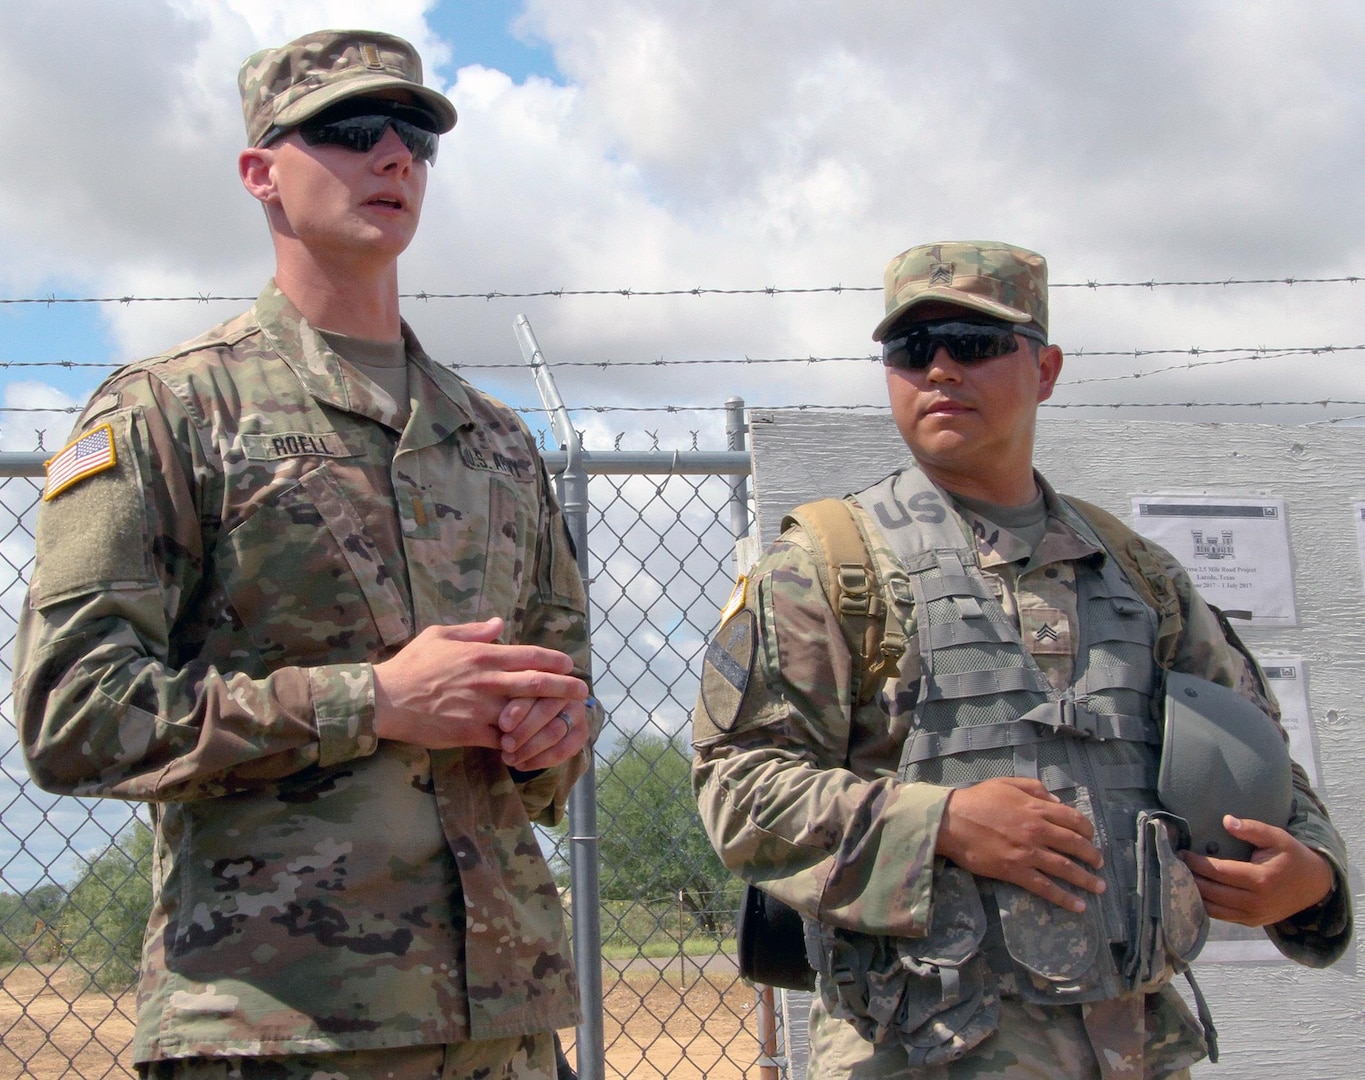 Second Lt. Michael Roell (left) and Sgt. Reuben Aleman, engineers with U.S. Army Reserve 312th Engineer Company, explain their project board during a briefing to distinguished visitors for the Innovative Readiness Training, or IRT, mission June 27 in Laredo, Texas. Both engineers were tasked with road improvement during the IRT mission as part of their two-week training.  